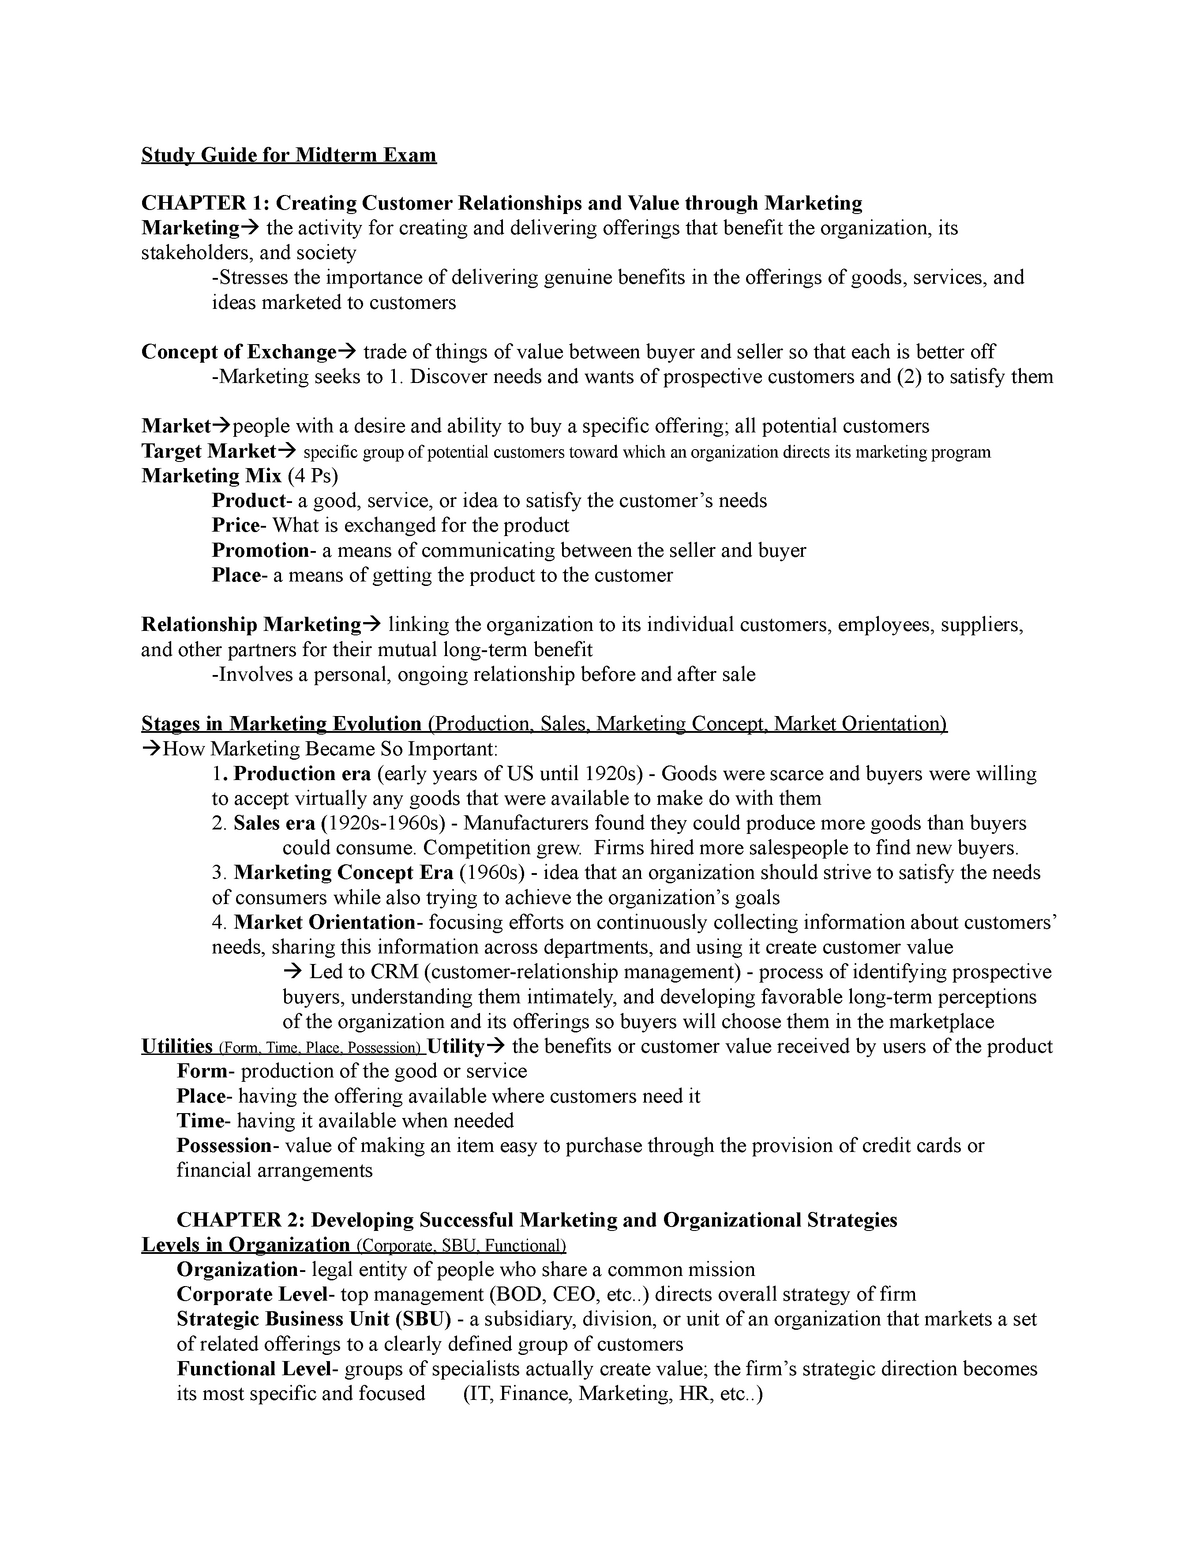 MKT Study guide 2-2 - Summary Principles Of Marketing - Study Guide for ...